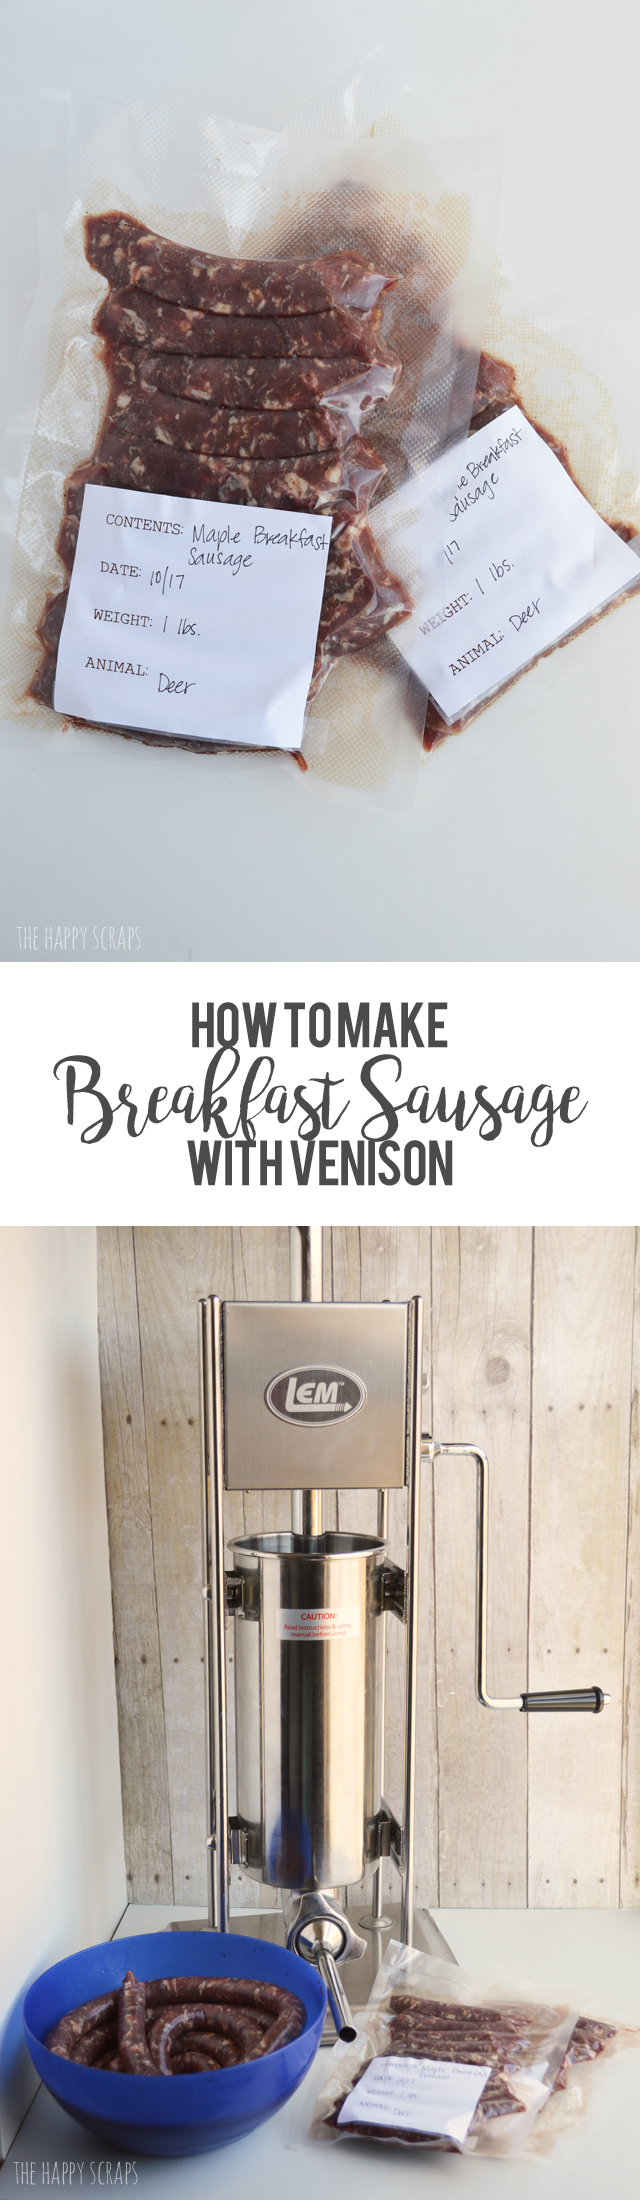 Did you know you can make sausage from Venison? On the blog I'm showing you How to Make Breakfast Sausage with Venison. It's one of our family's favorites. 